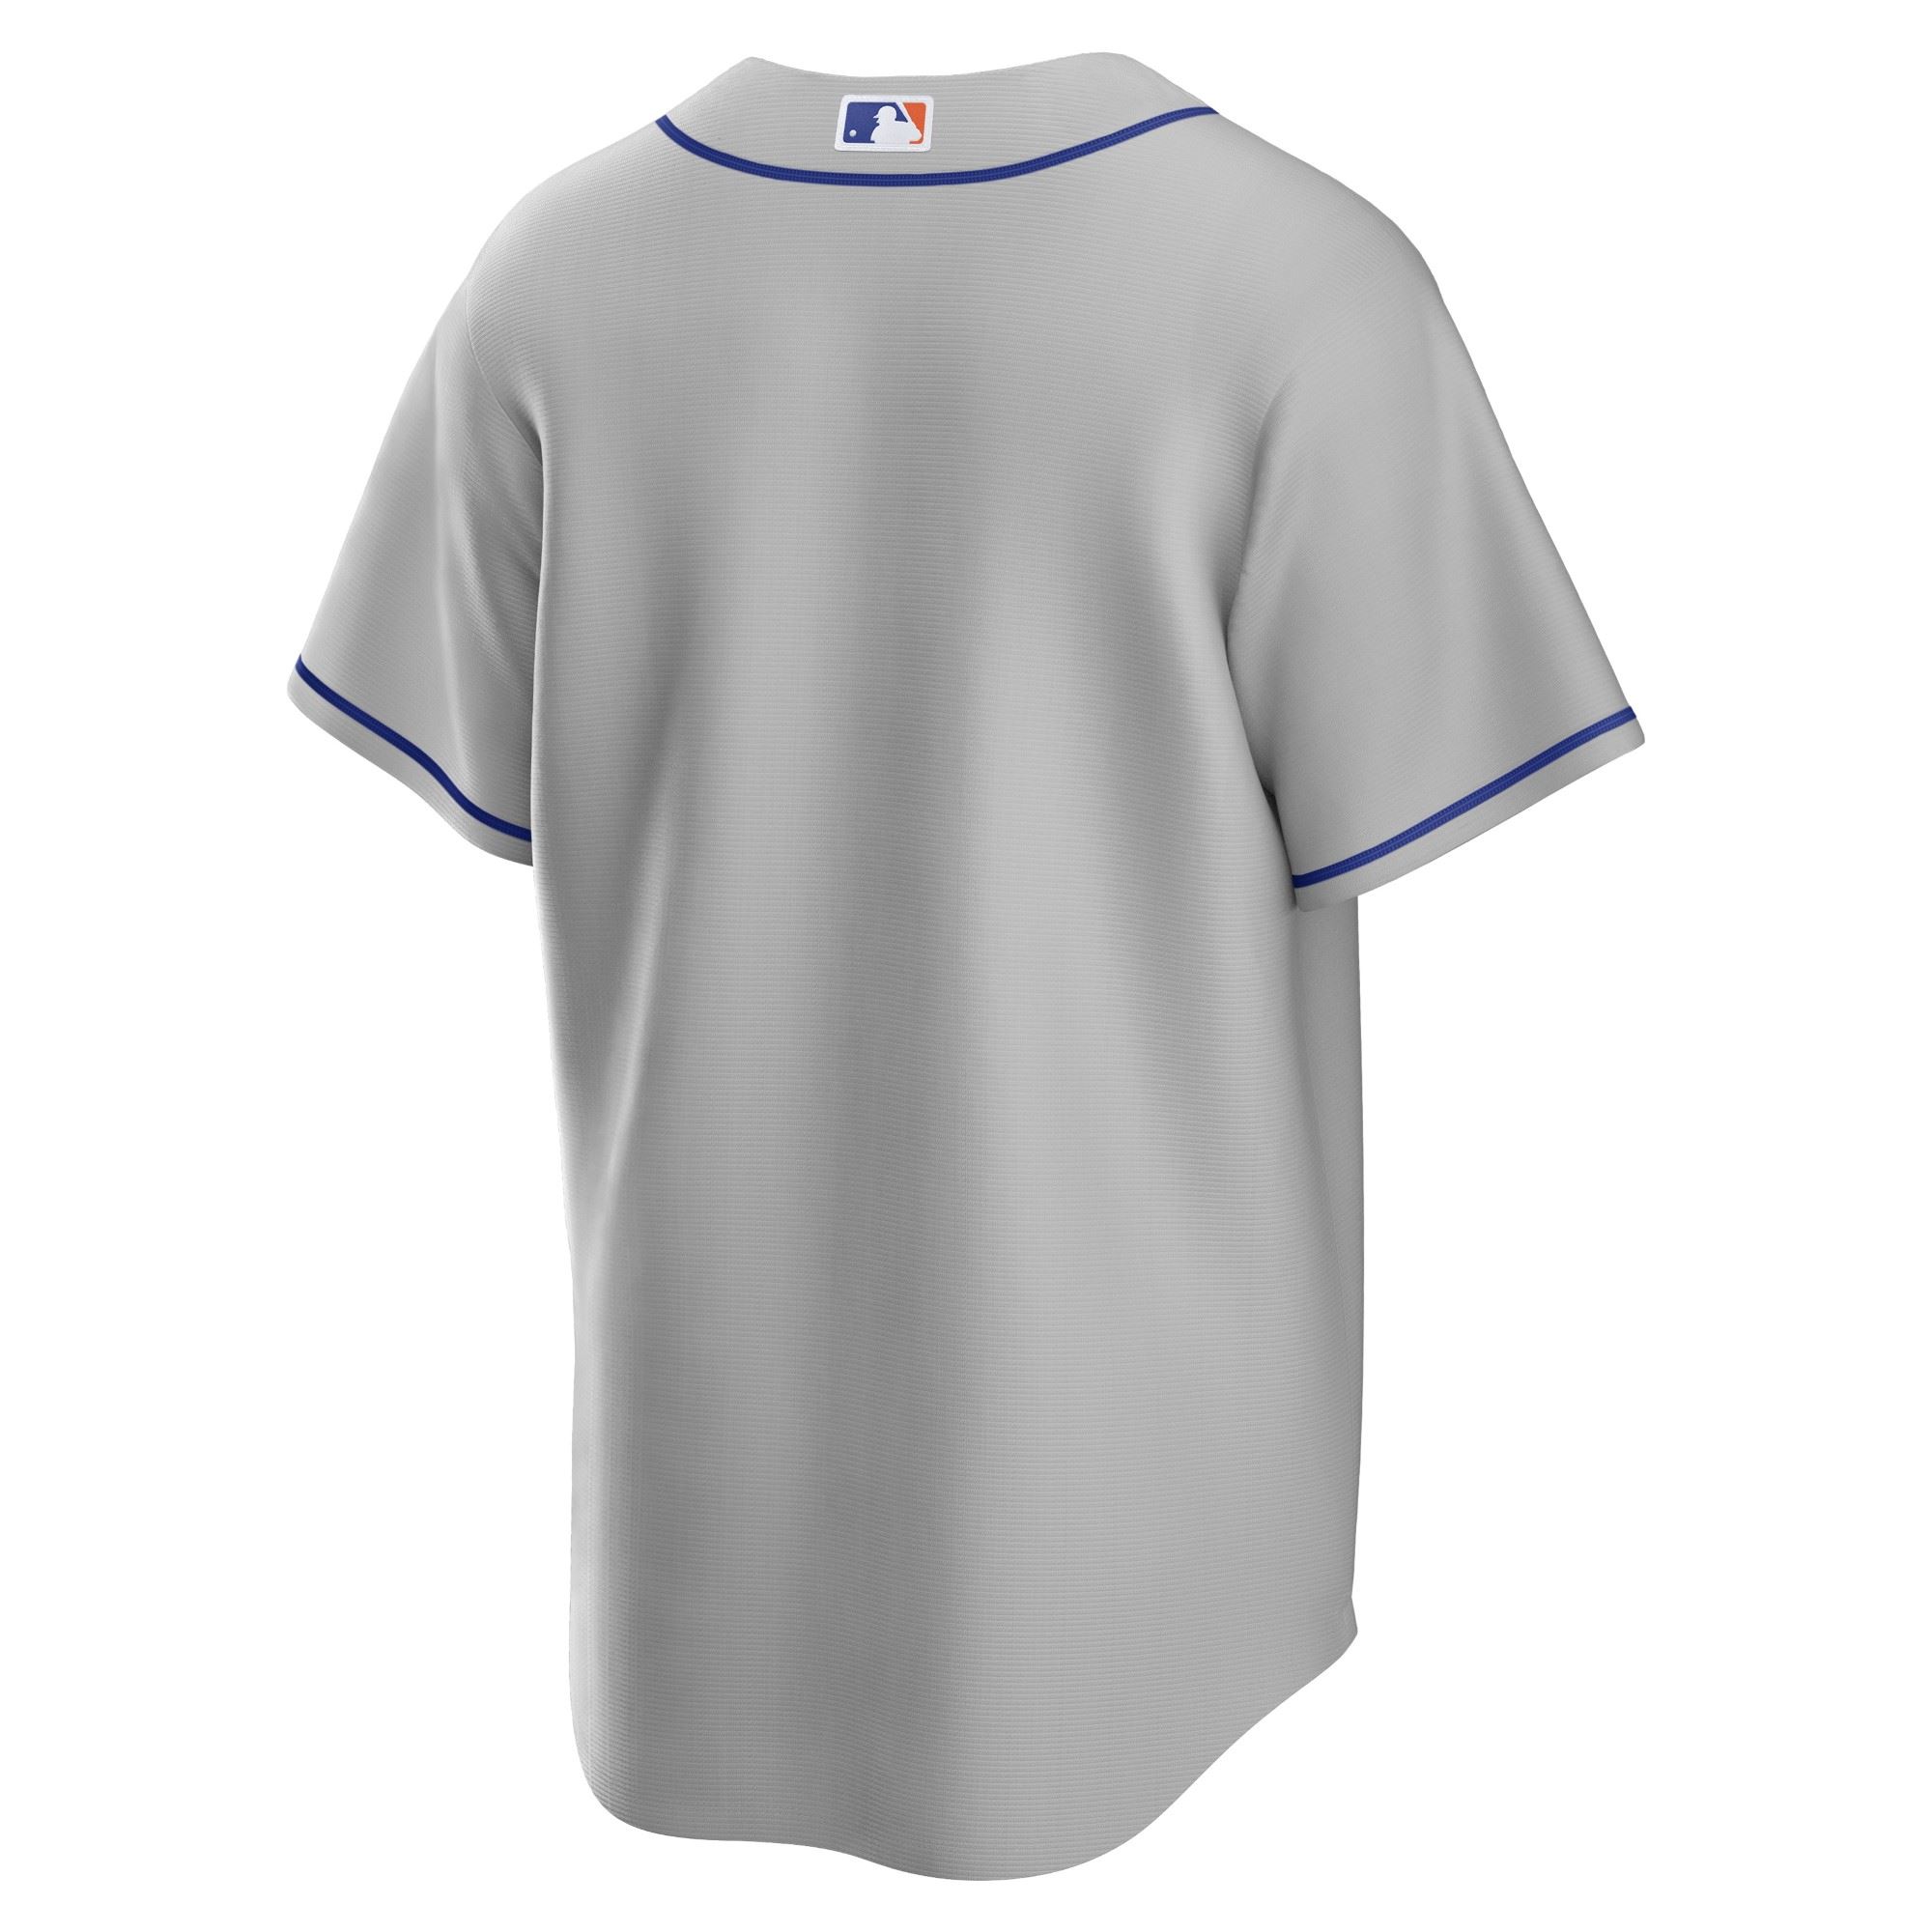 New York Mets Gray Official MLB Replica Road Jersey Nike